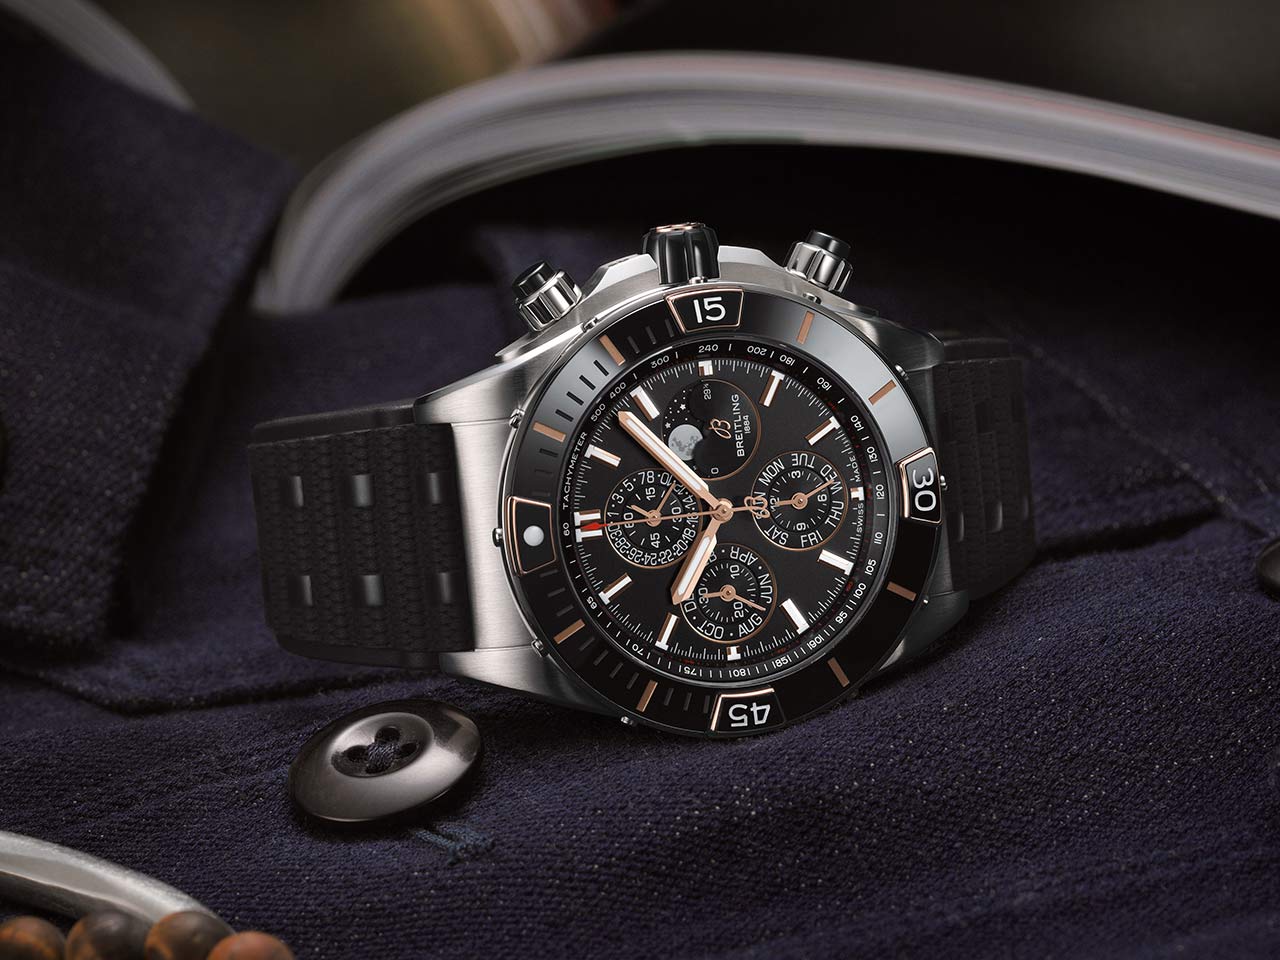 Breitling - Super Chronomat | Time and Watches | The watch blog